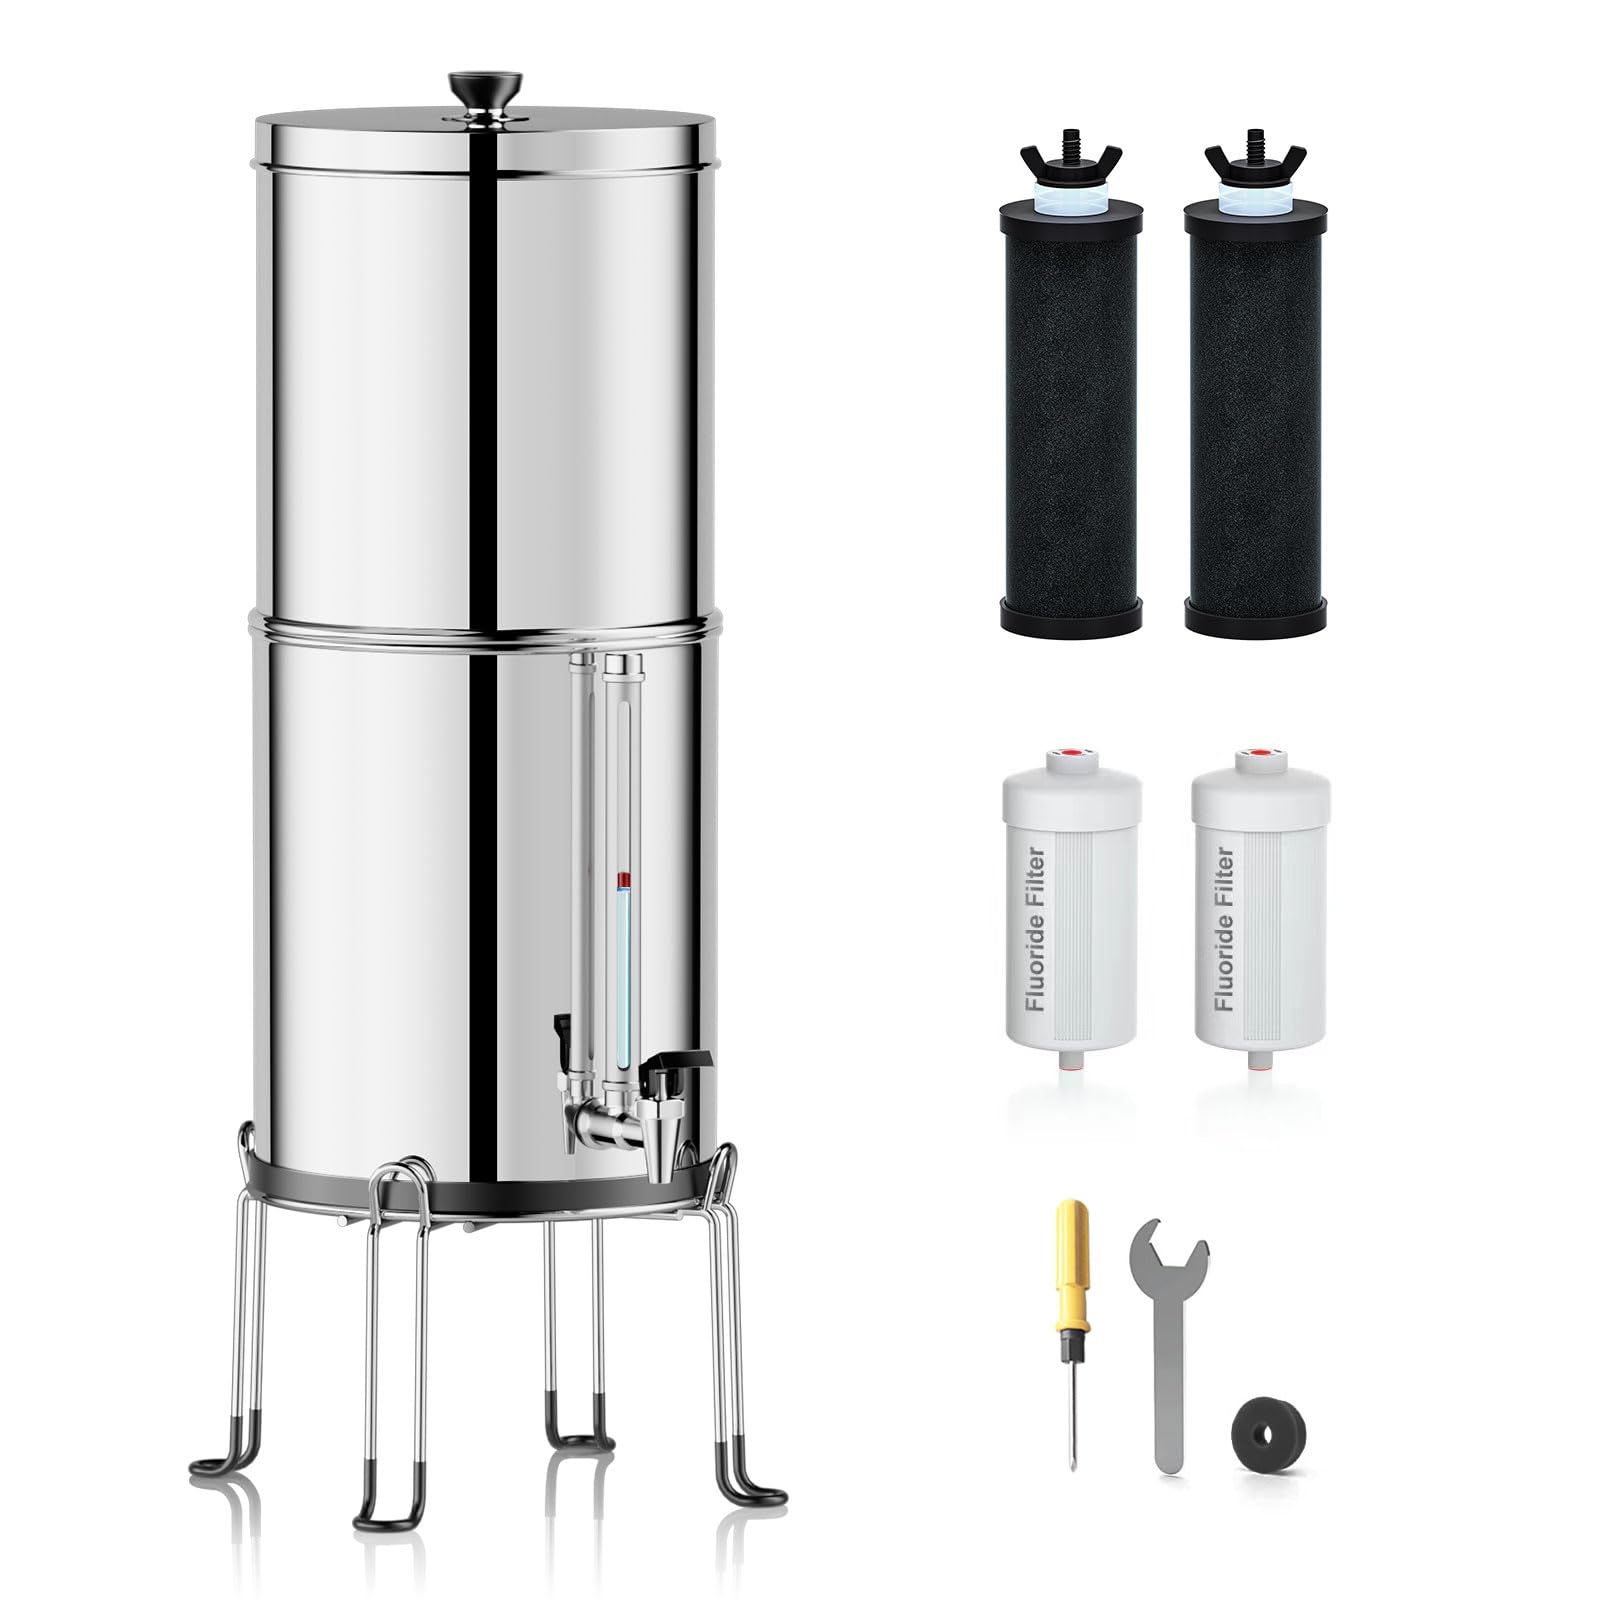 Purewell 8-Stage 0.01μm Ultra-Filtration Water Filter System, 304 Stainless Steel Countertop System with 4 Filters, Metal Water Level Spigot and Stand, Reduce Fluoride and Chlorine, 2.25G, PW-OB-CF